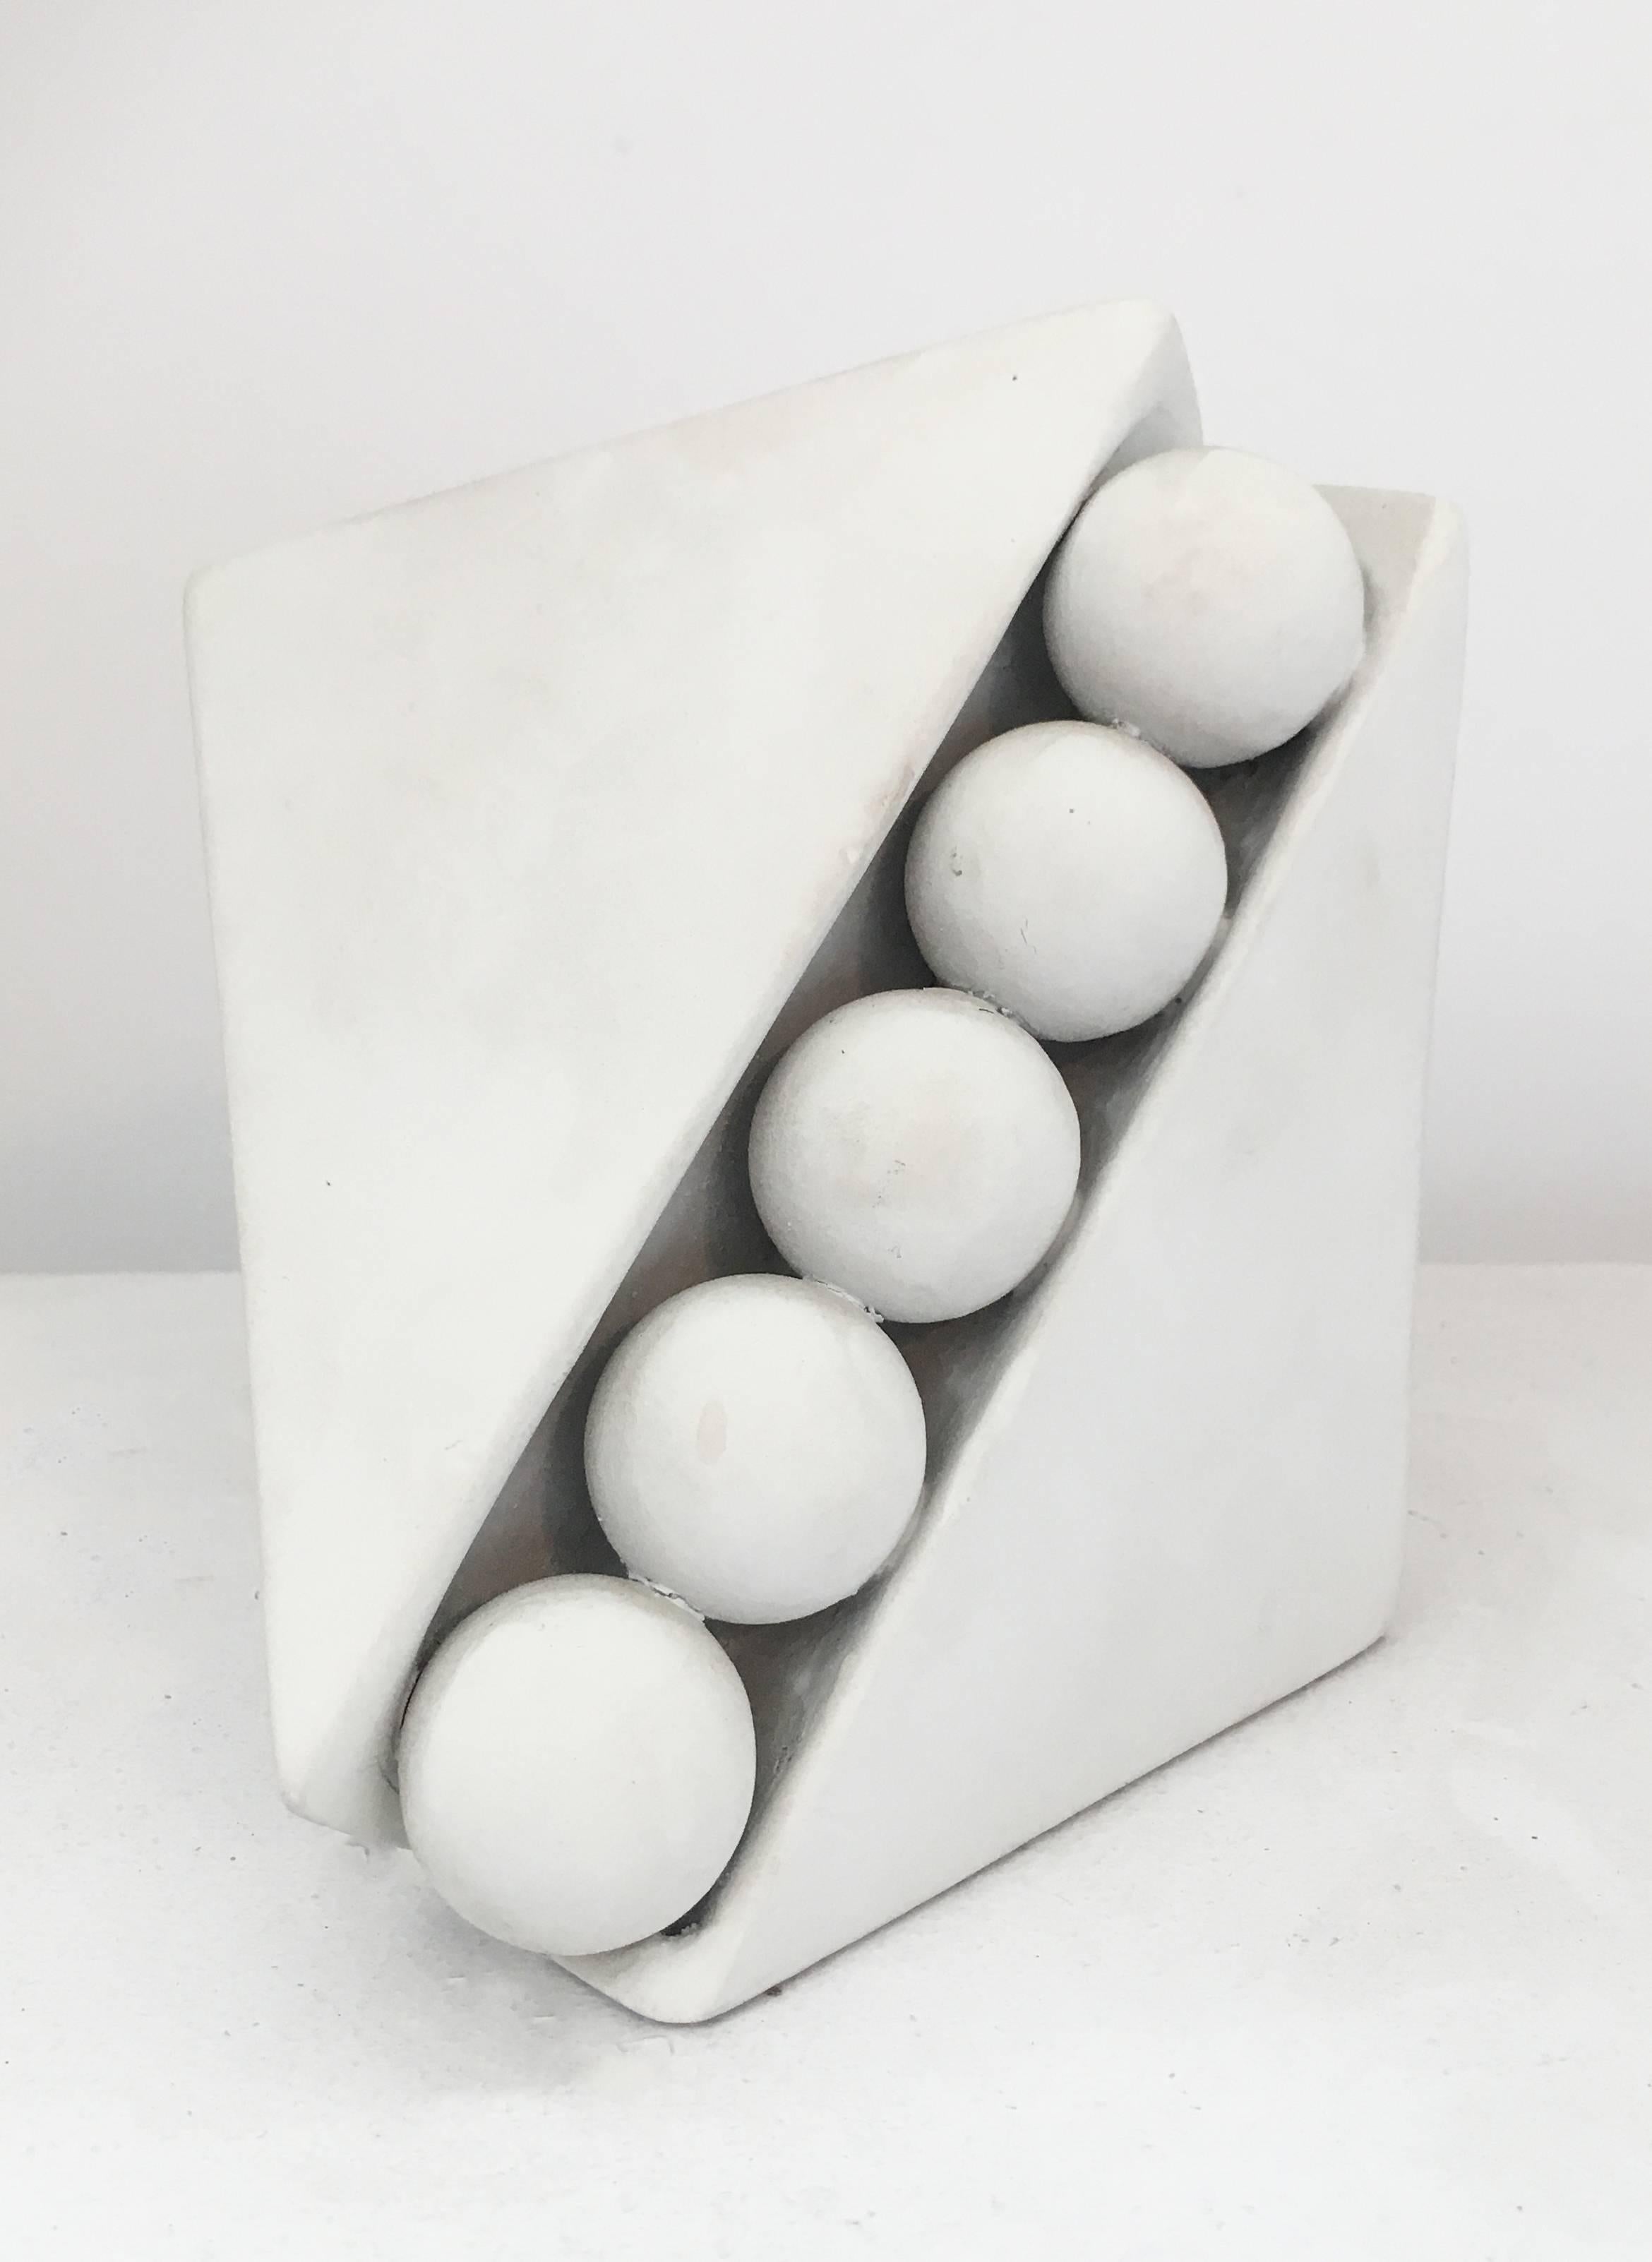 Small abstract white sculpture in mid century modern style
White painted wood and copper
6 x 6 x 6 inches

This small, contemporary abstract sculpture made of white painted wood and copper is perfectly suited for a tabletop, pedestal, or mantle